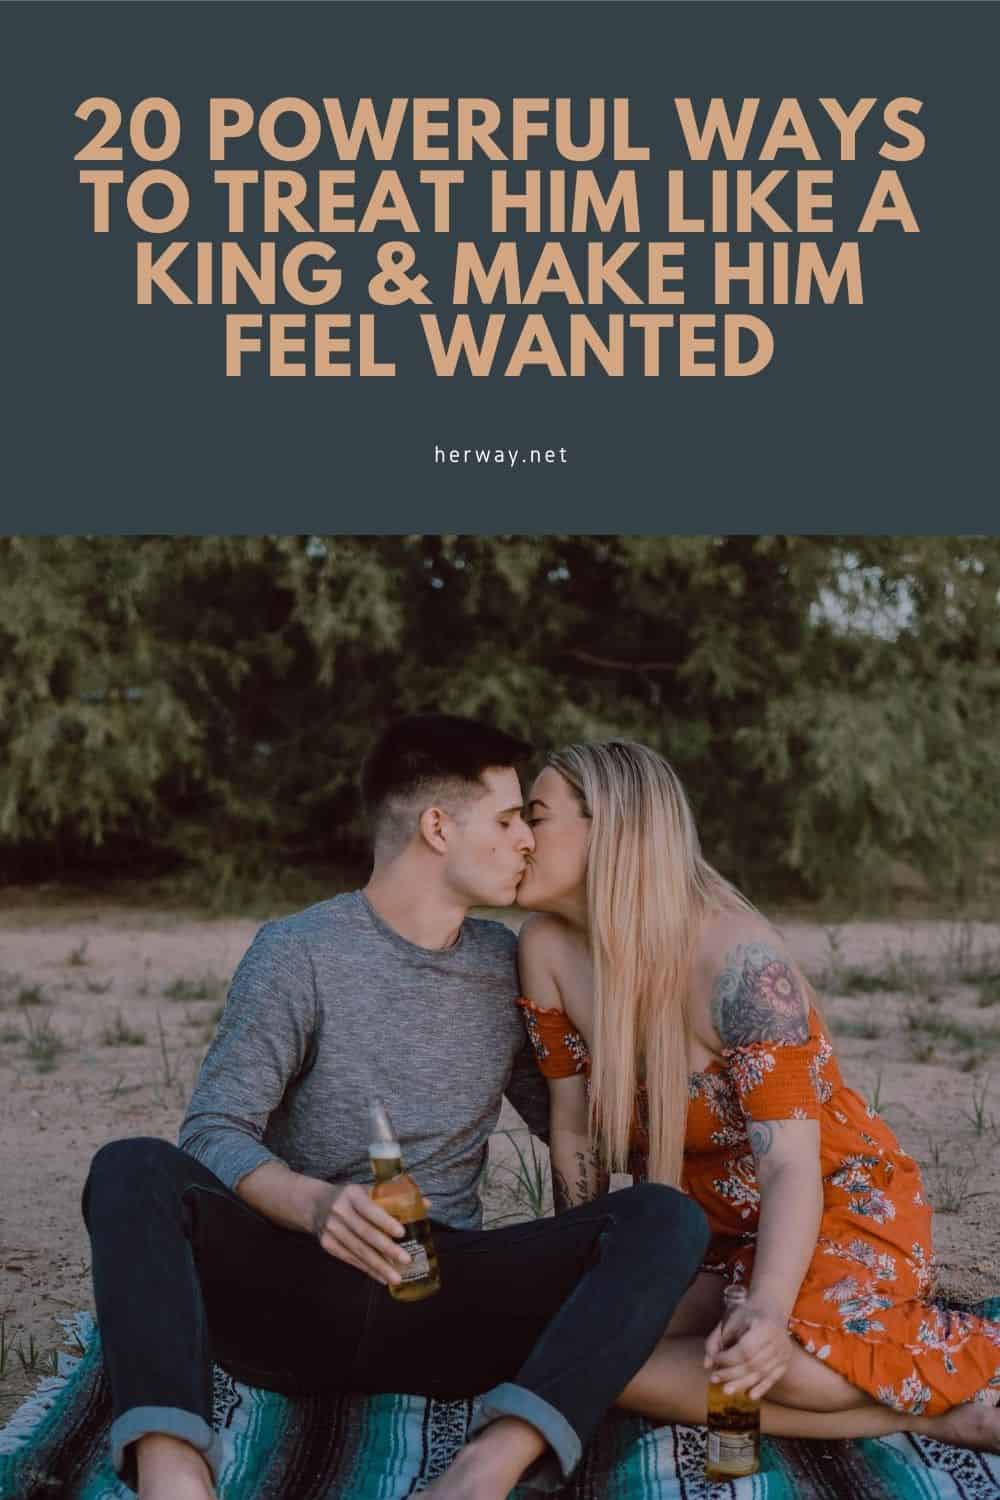 20 Powerful Ways To Treat Him Like A King & Make Him Feel Wanted